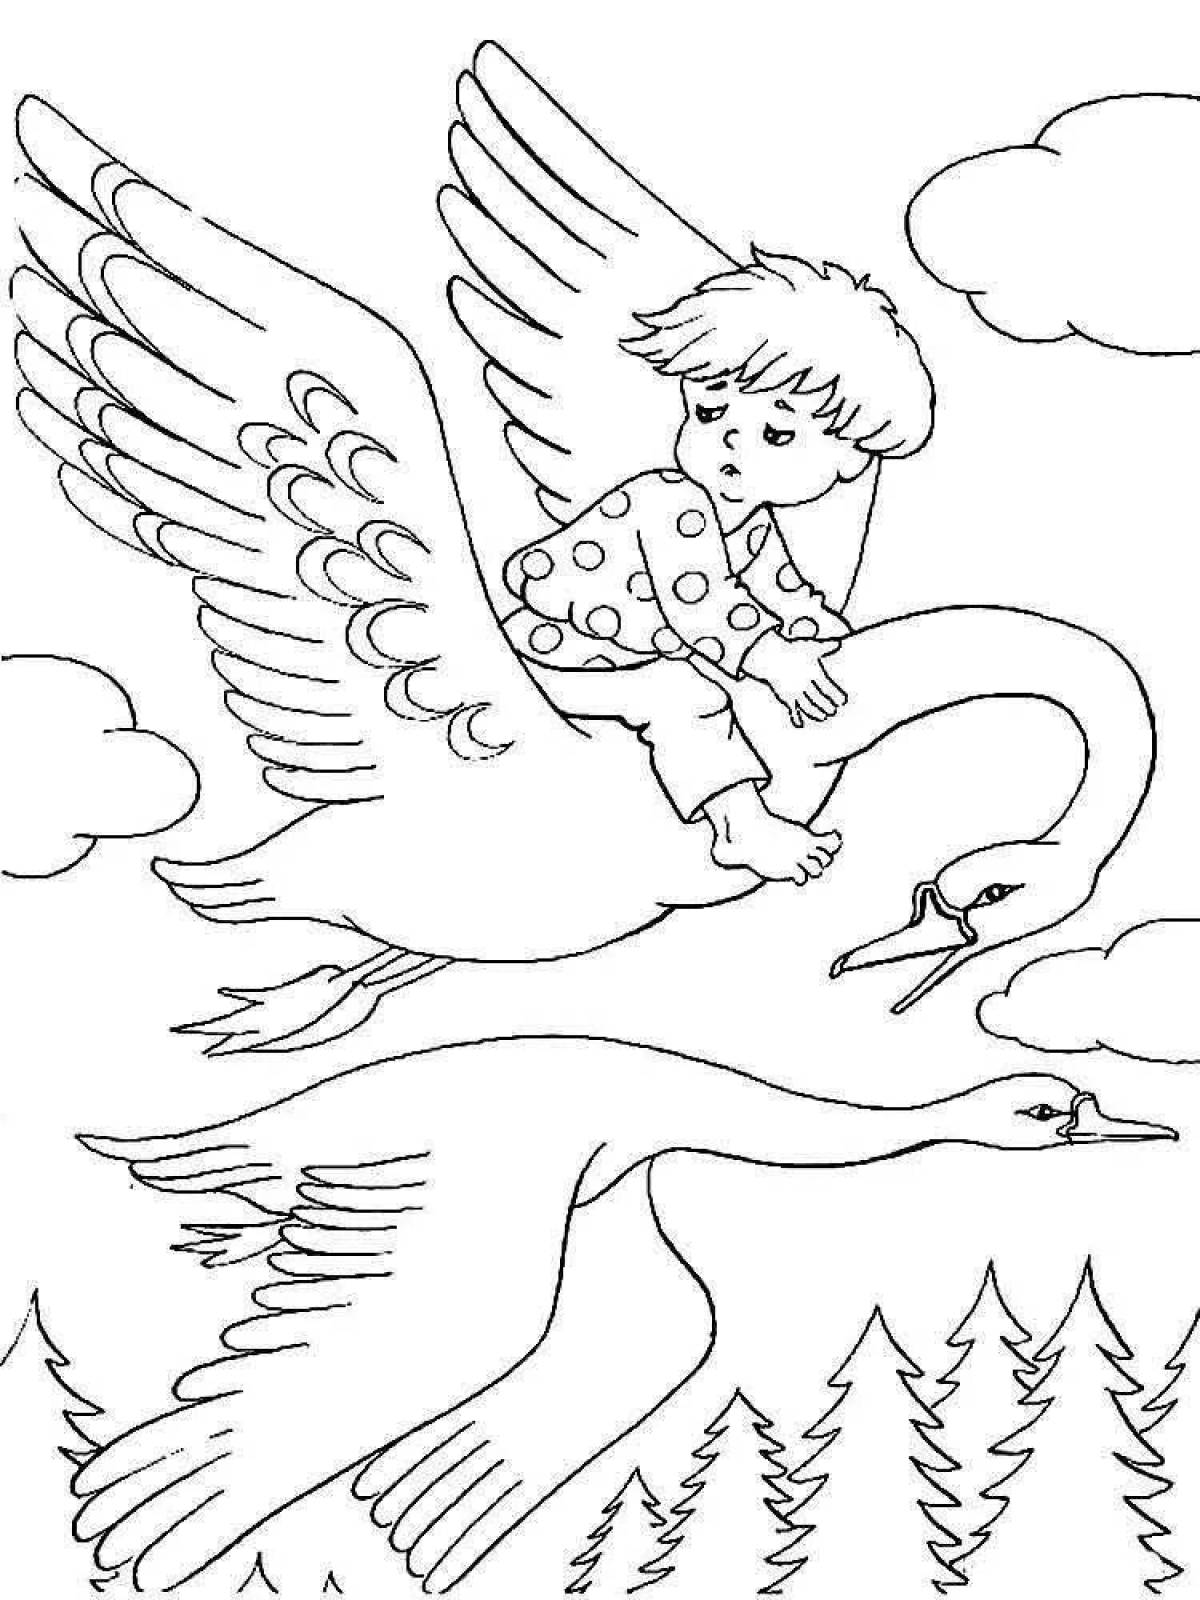 Coloring page dazzling swan geese